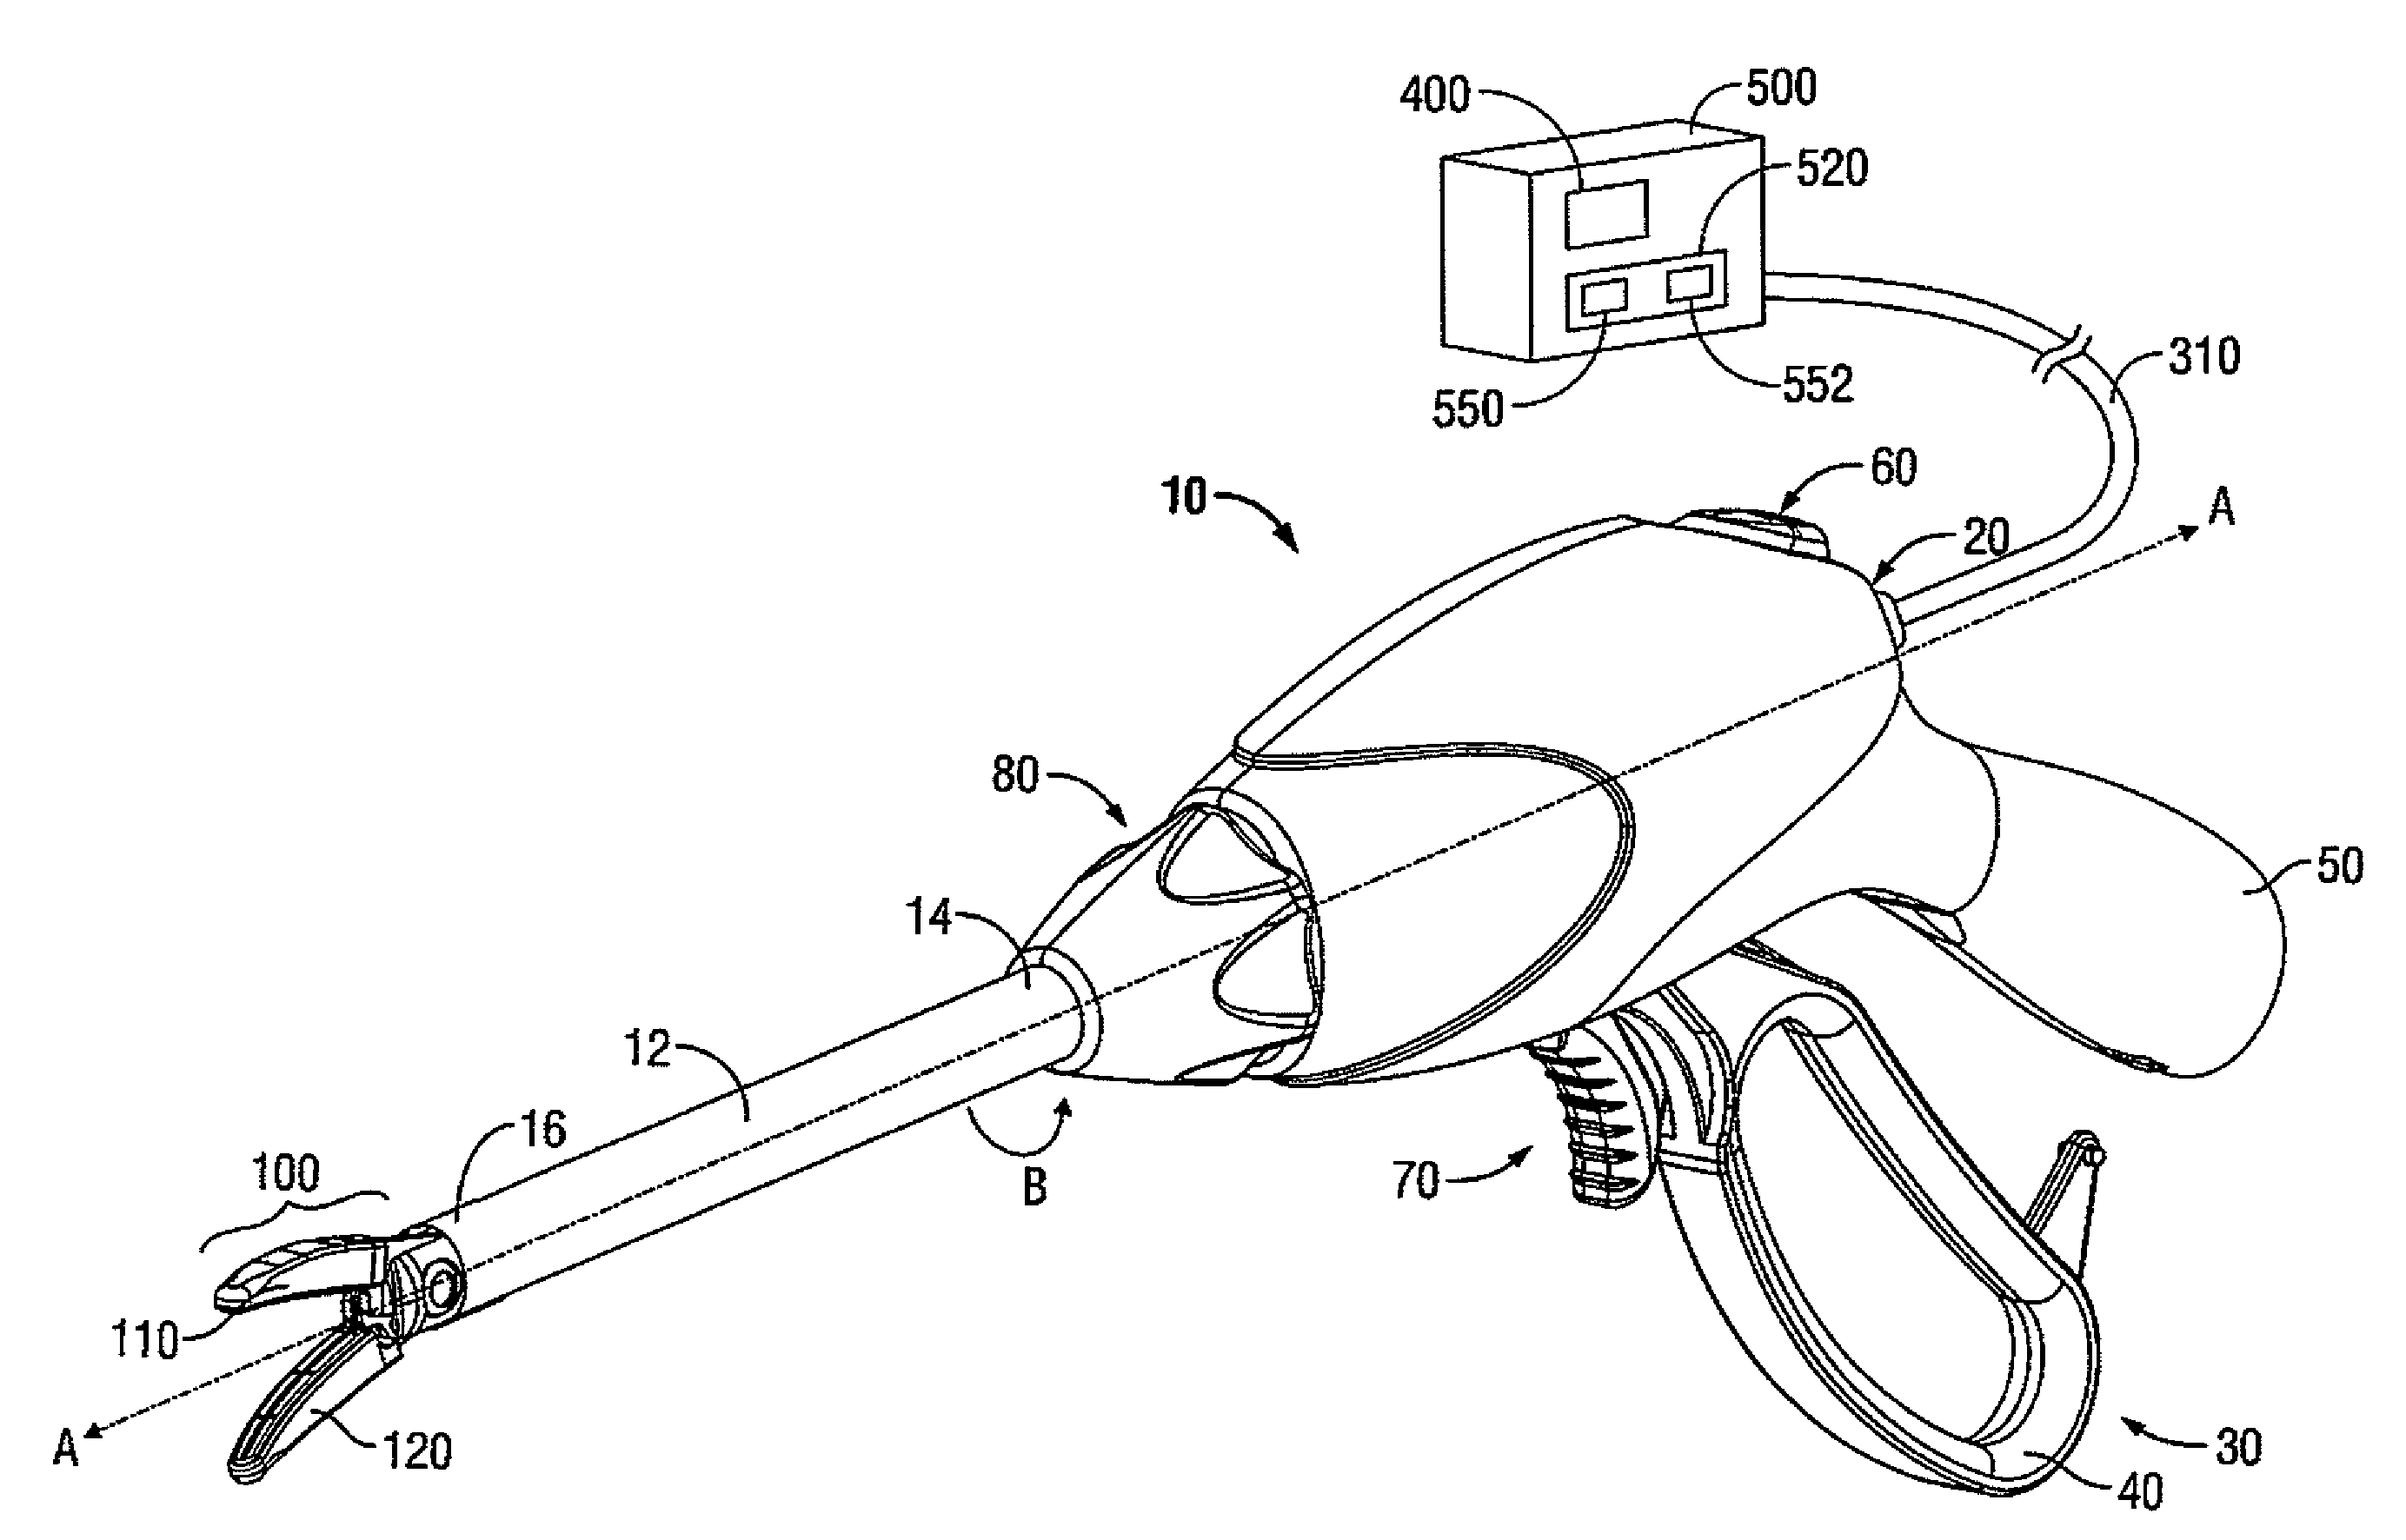 Apparatus, System and Method for Monitoring Tissue During an Electrosurgical Procedure